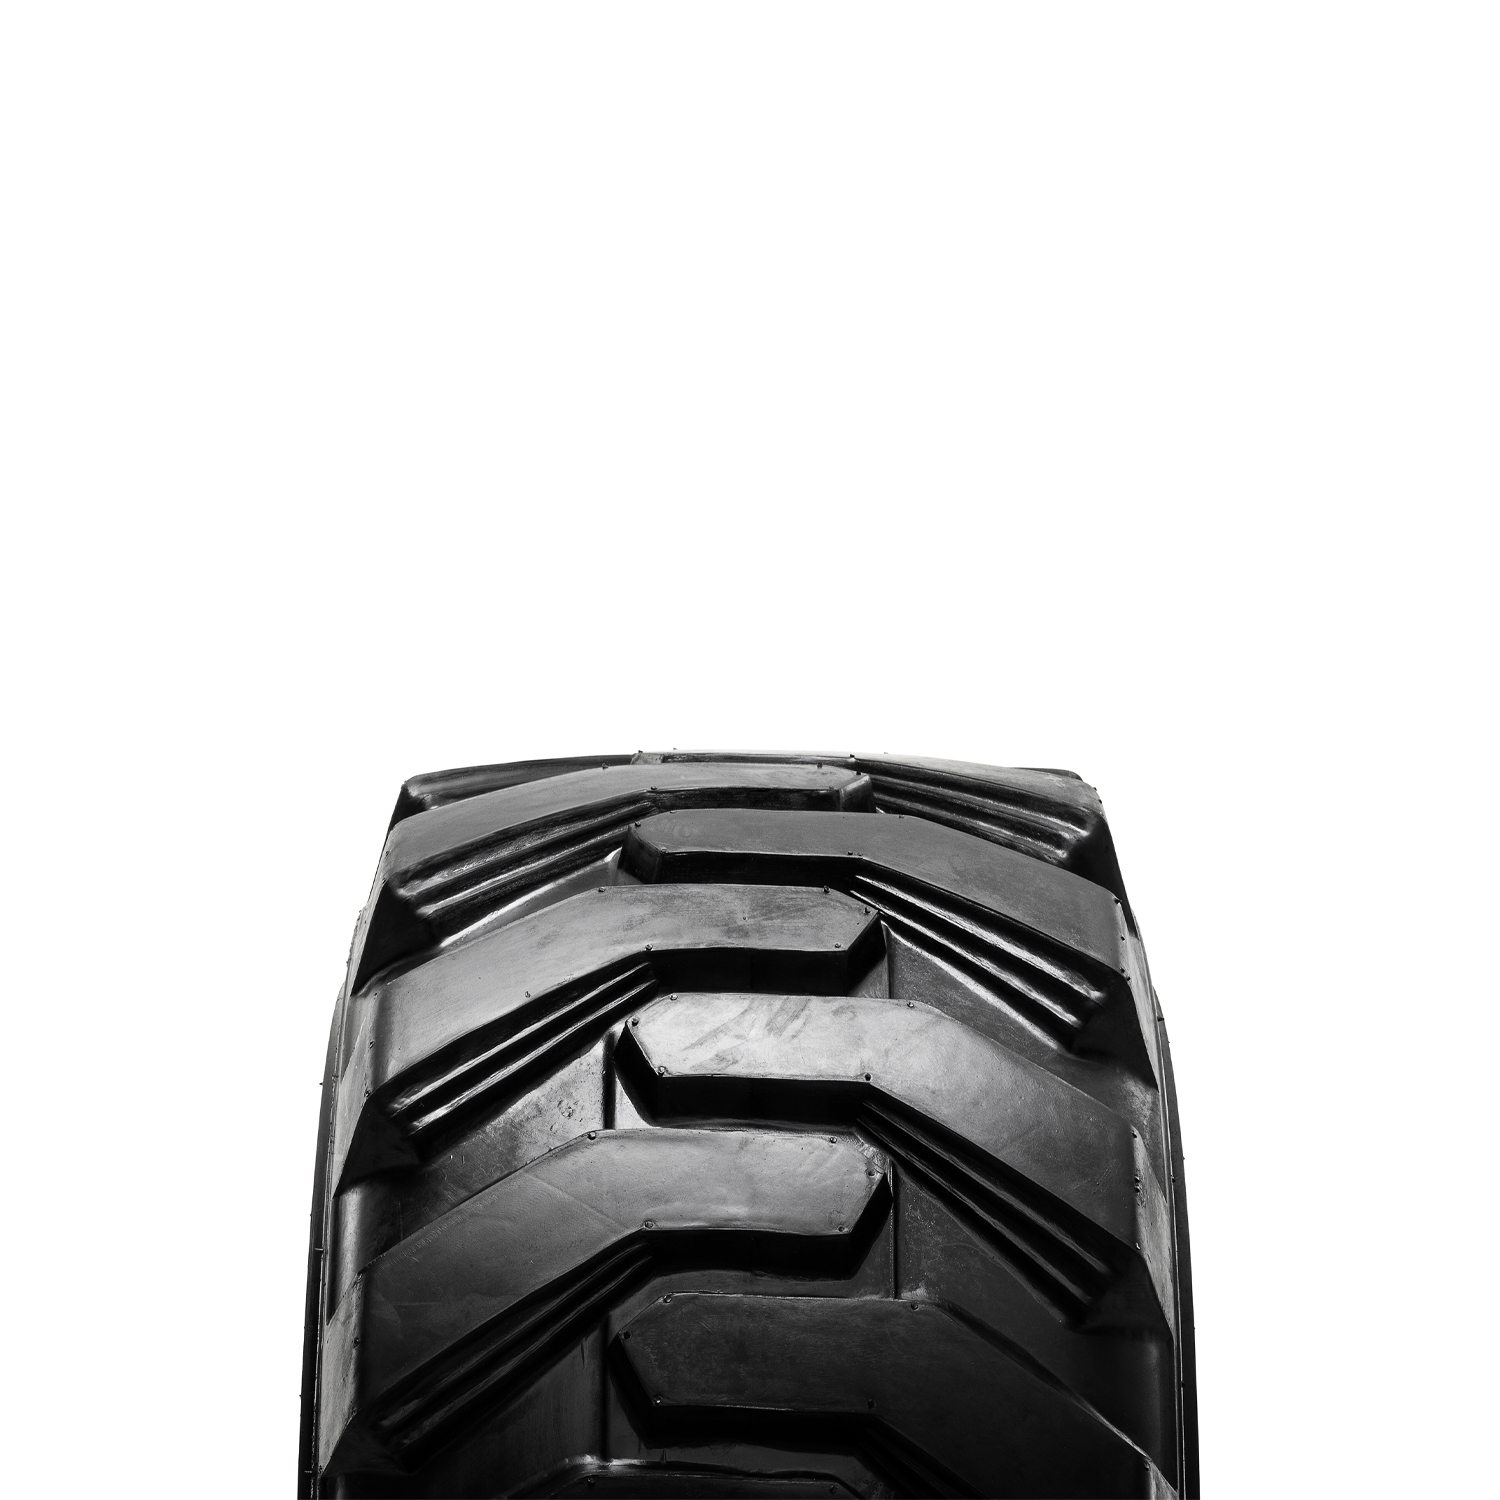 Xtra Wall | Skid Steer Loader Tire – Products | Camso